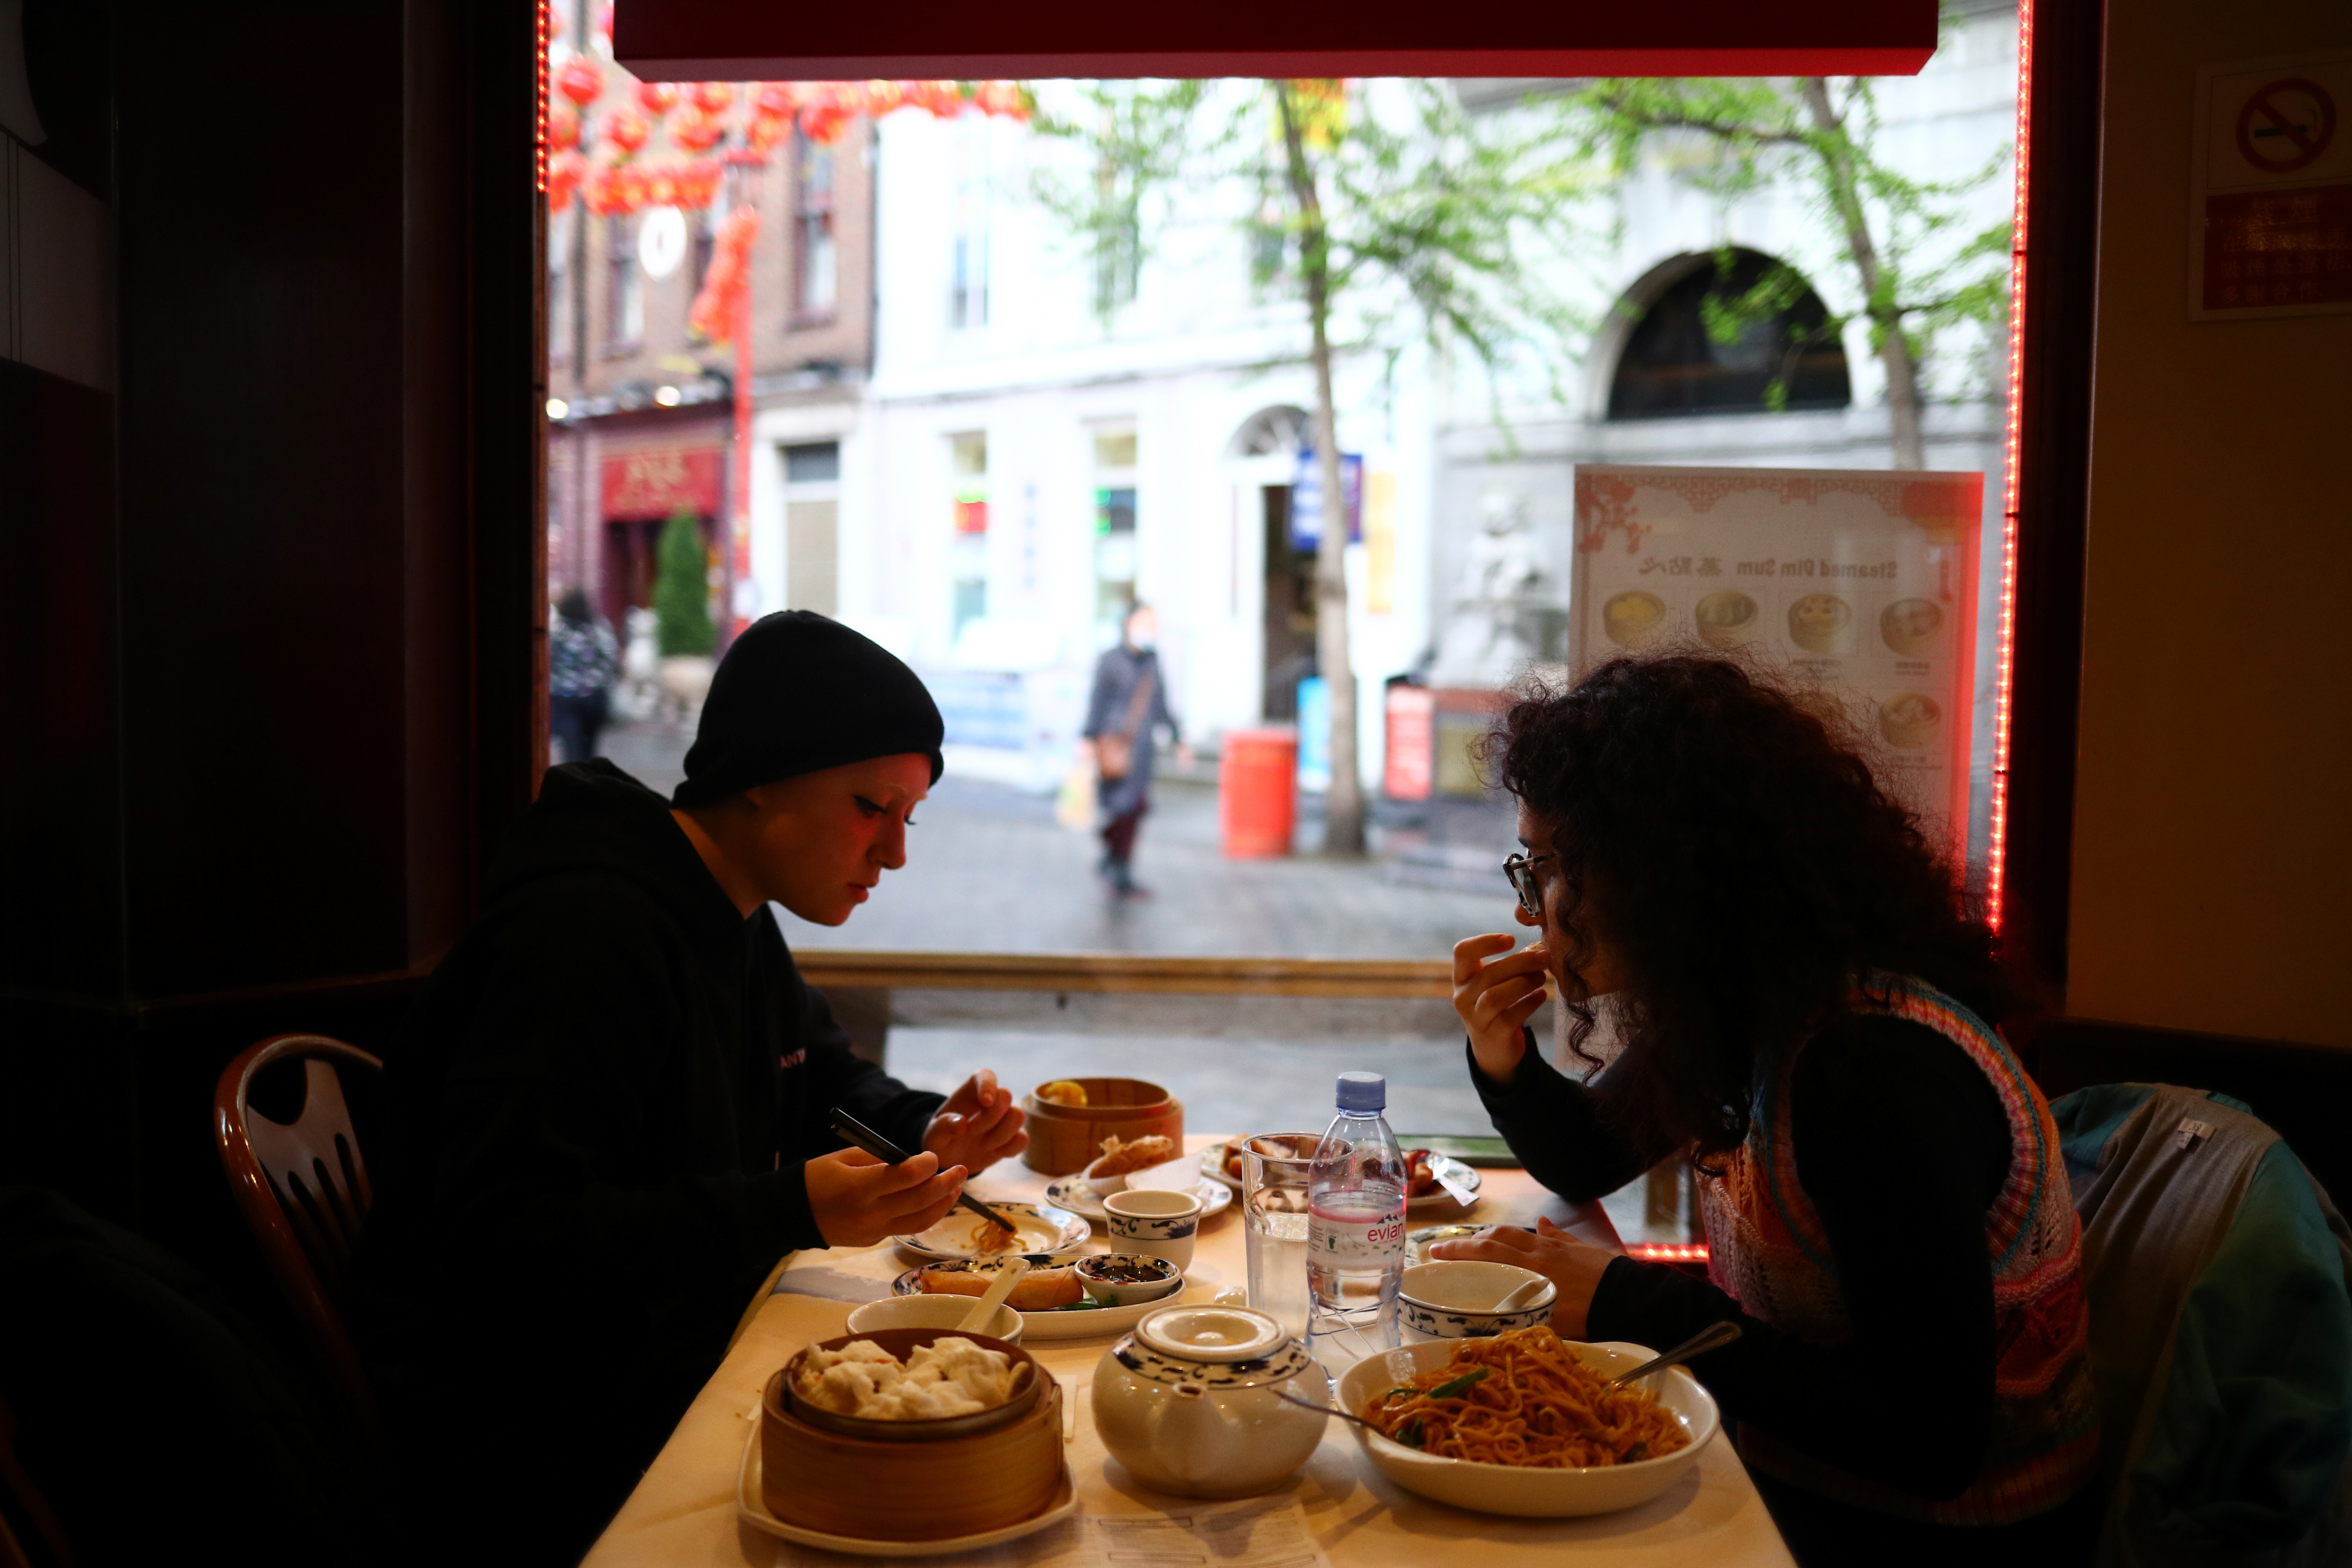 People sit inside a restaurant, amid the outbreak of the coronavirus disease (COVID-19), in Chinatown, London, Britain, 18 May 2021. REUTERS/Hannah McKay